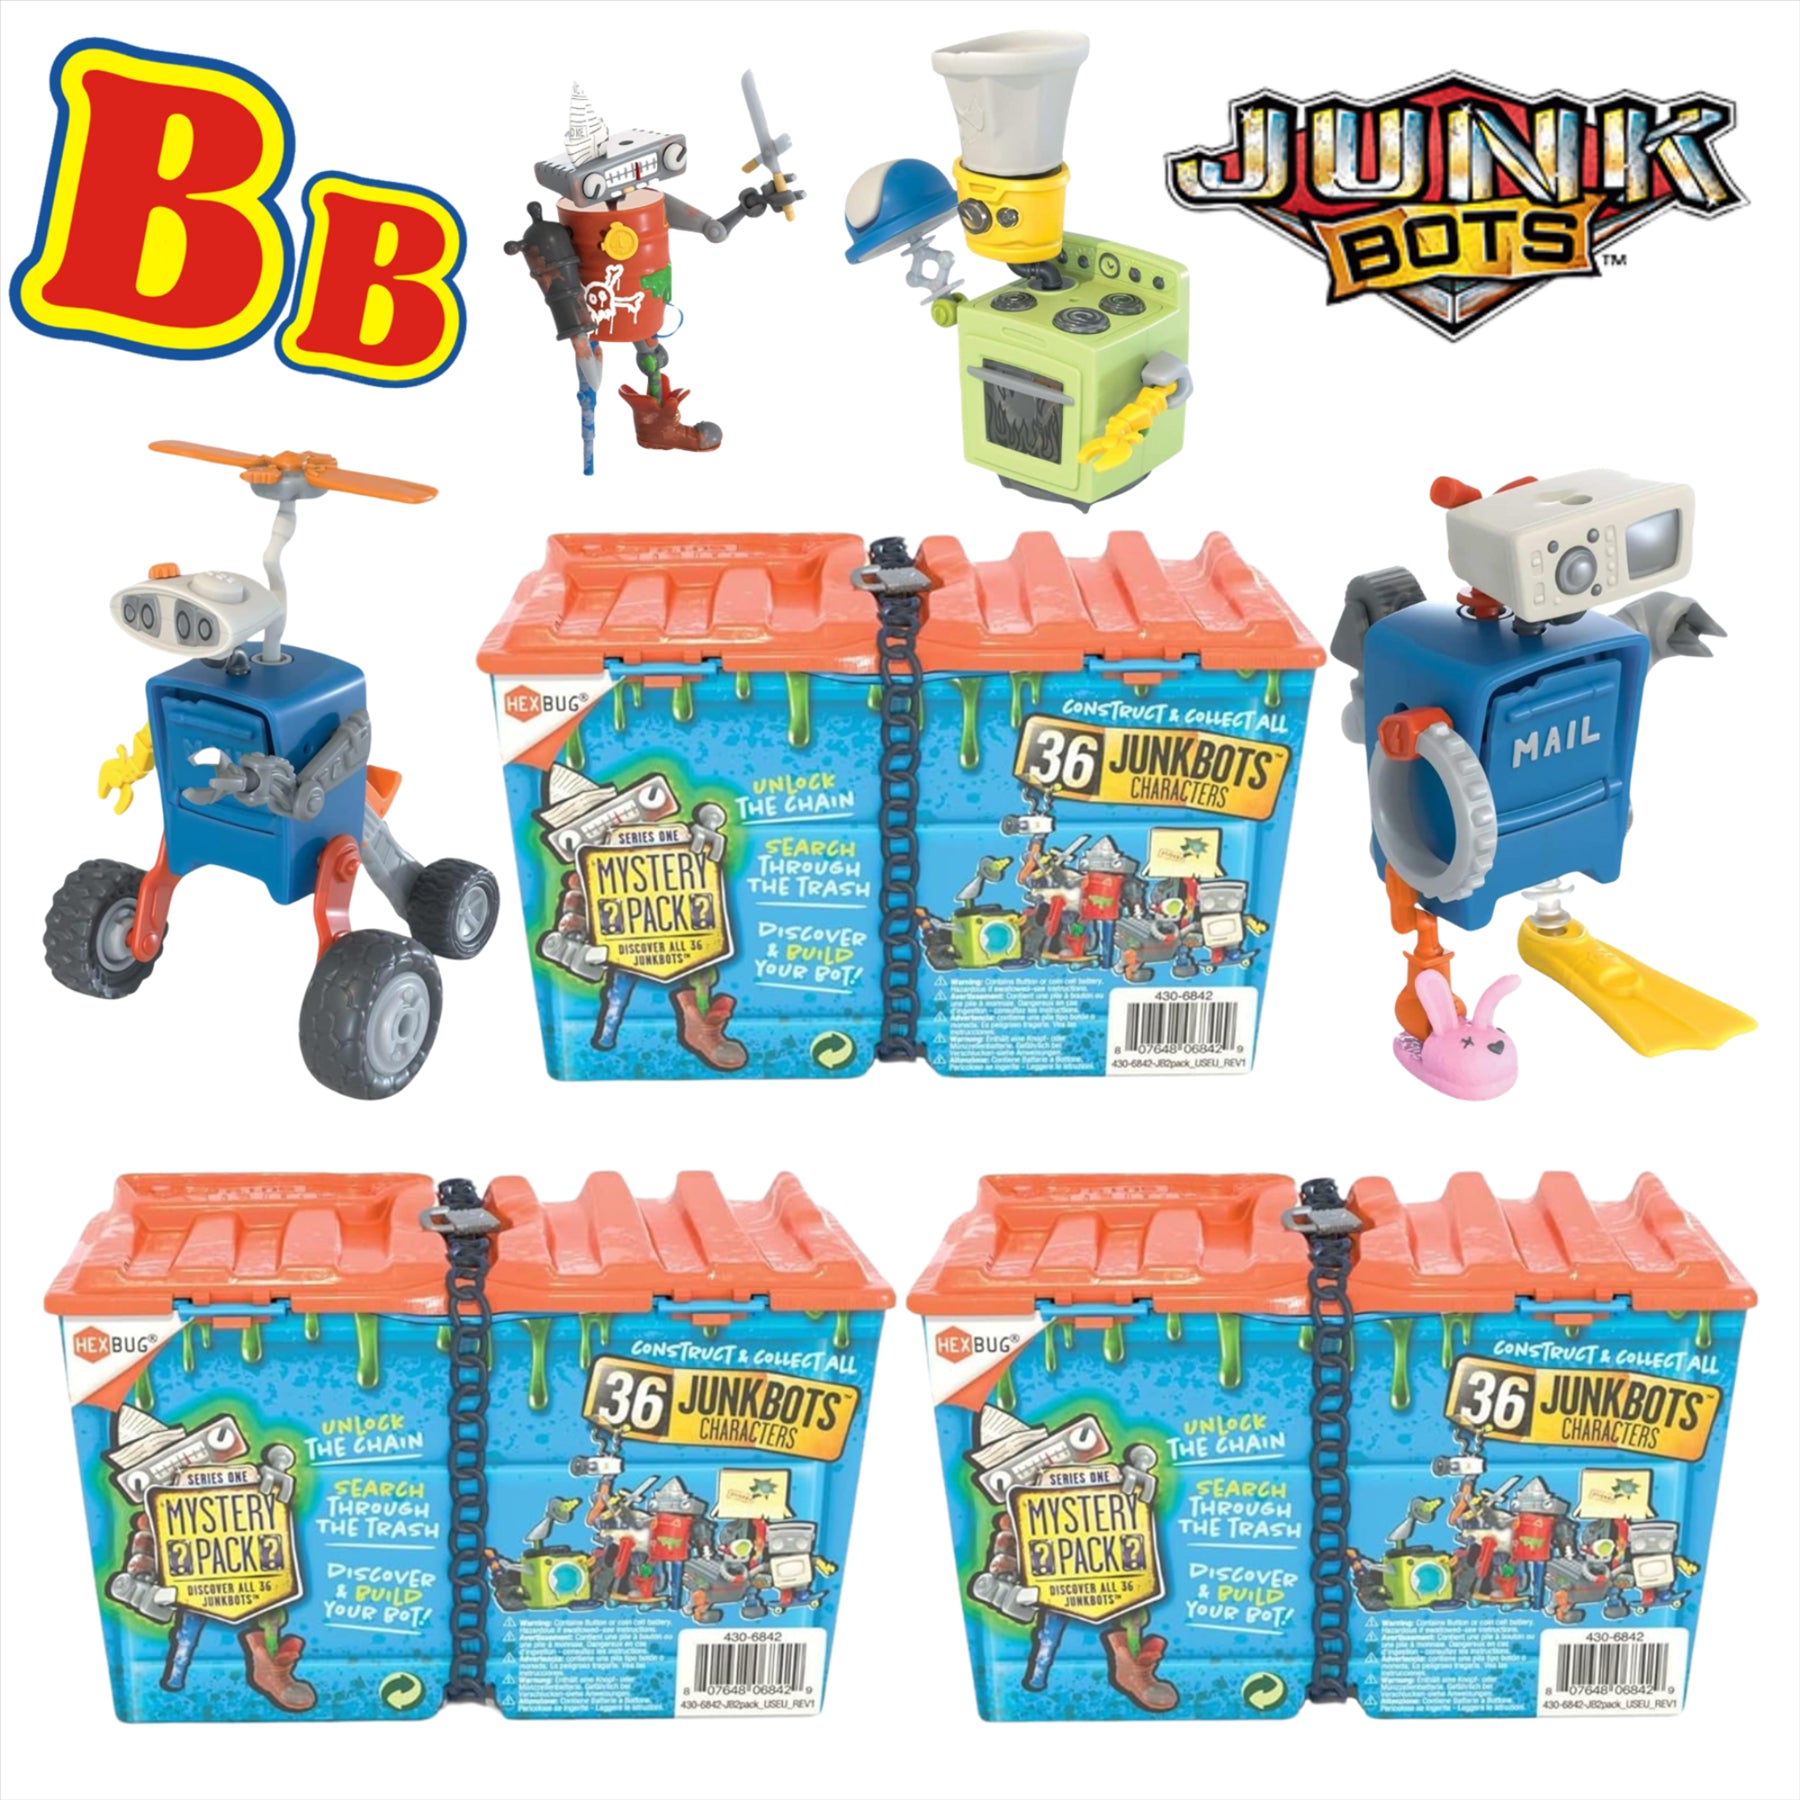 Hexbug Junkbots - Dumpster With 2 Unique Characters to Assemble in Each Box - Pack of 3 - Toptoys2u